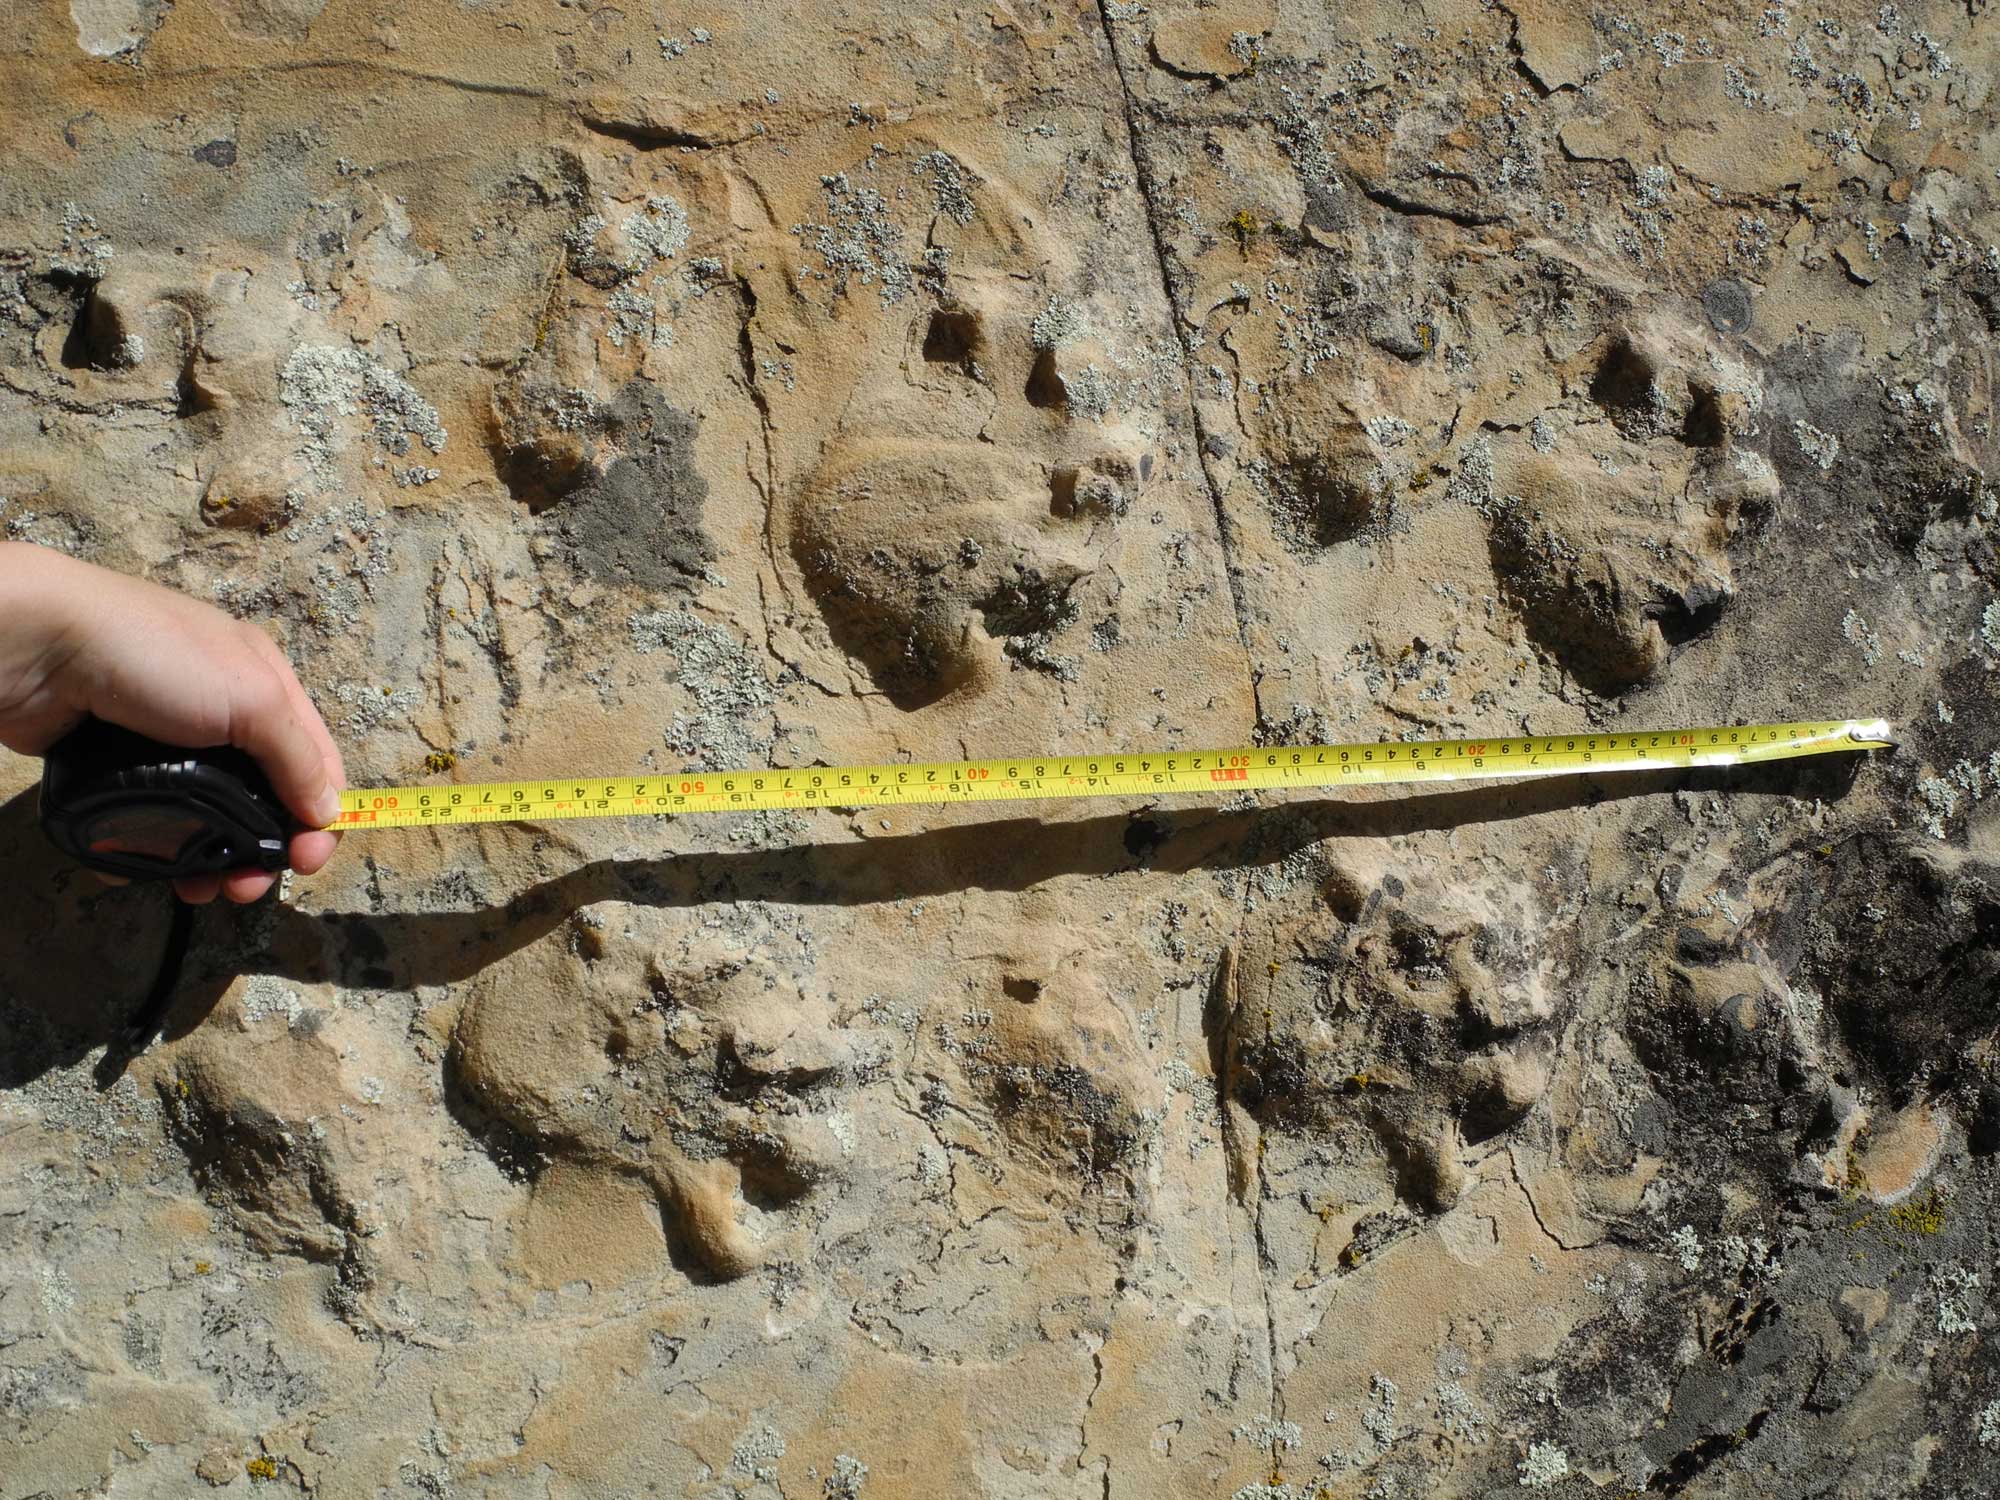 Photograph of Chelichnus tracks, the five-toes prints of a mammal-like reptile, in the Permian Coconino Sandstone at Grand Canyon National Park.